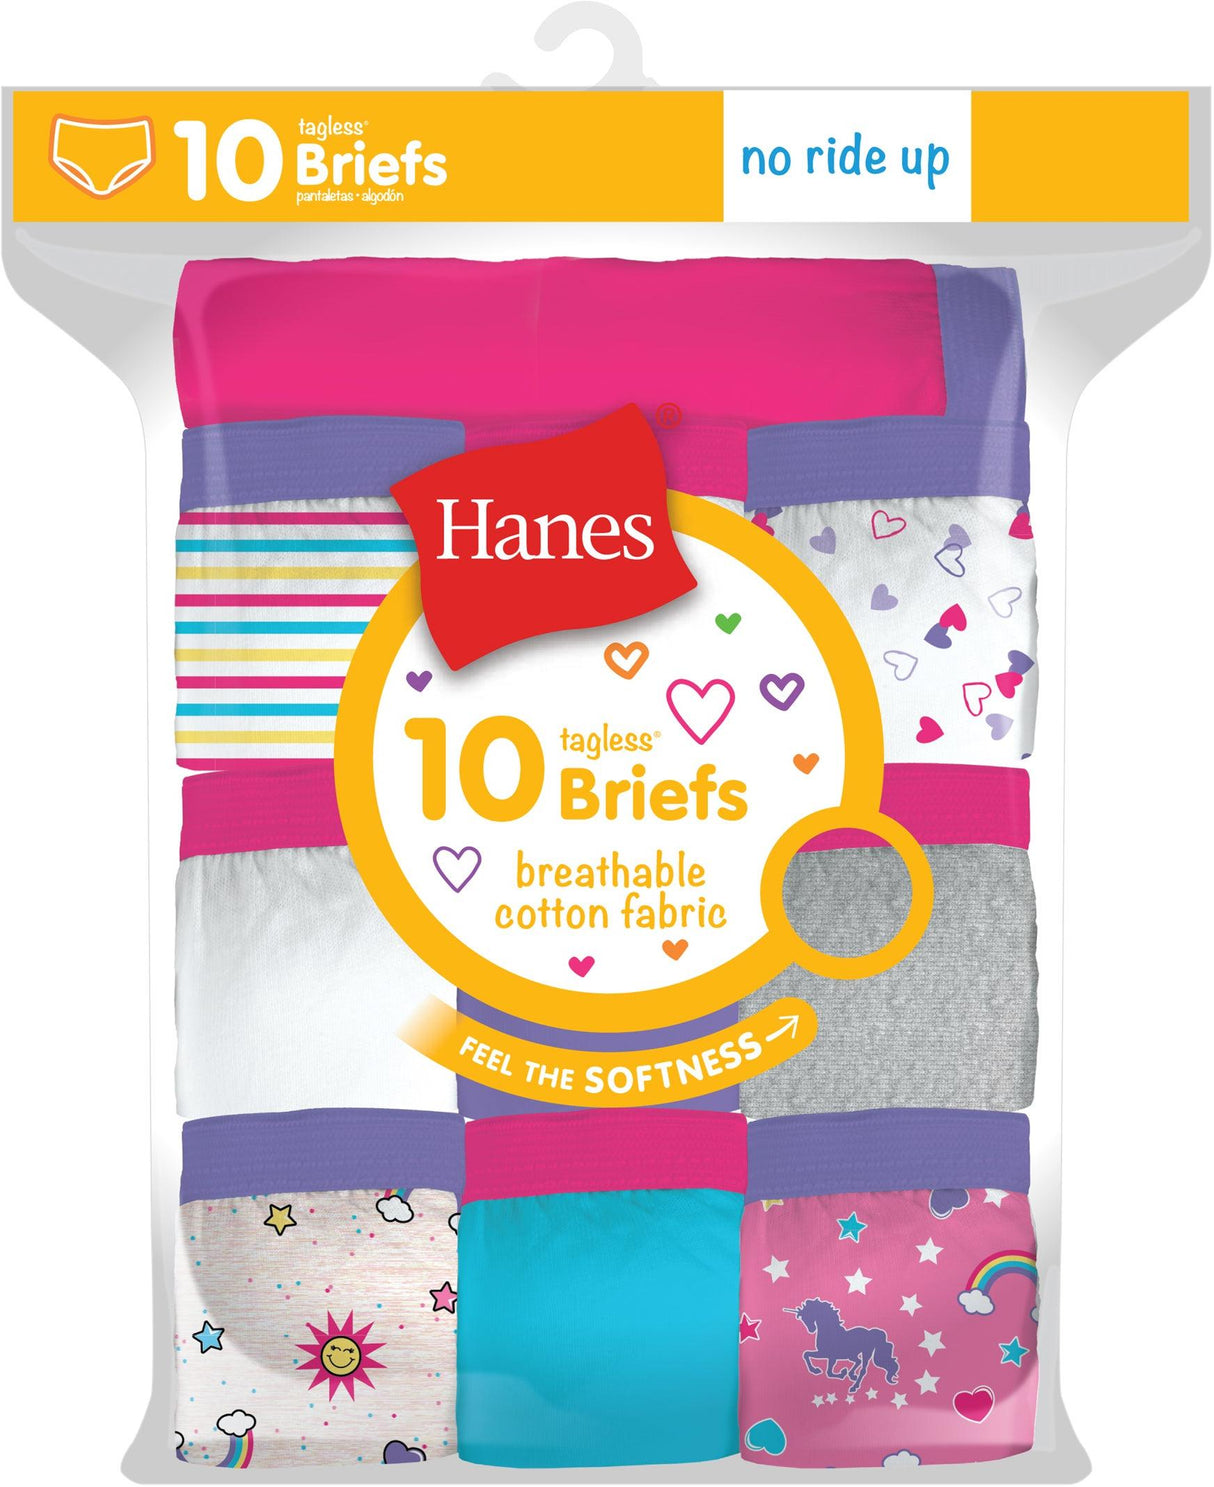 Hanes Girls' Cotton Low Rise Briefs, 10-Pack Assorted 1 8 